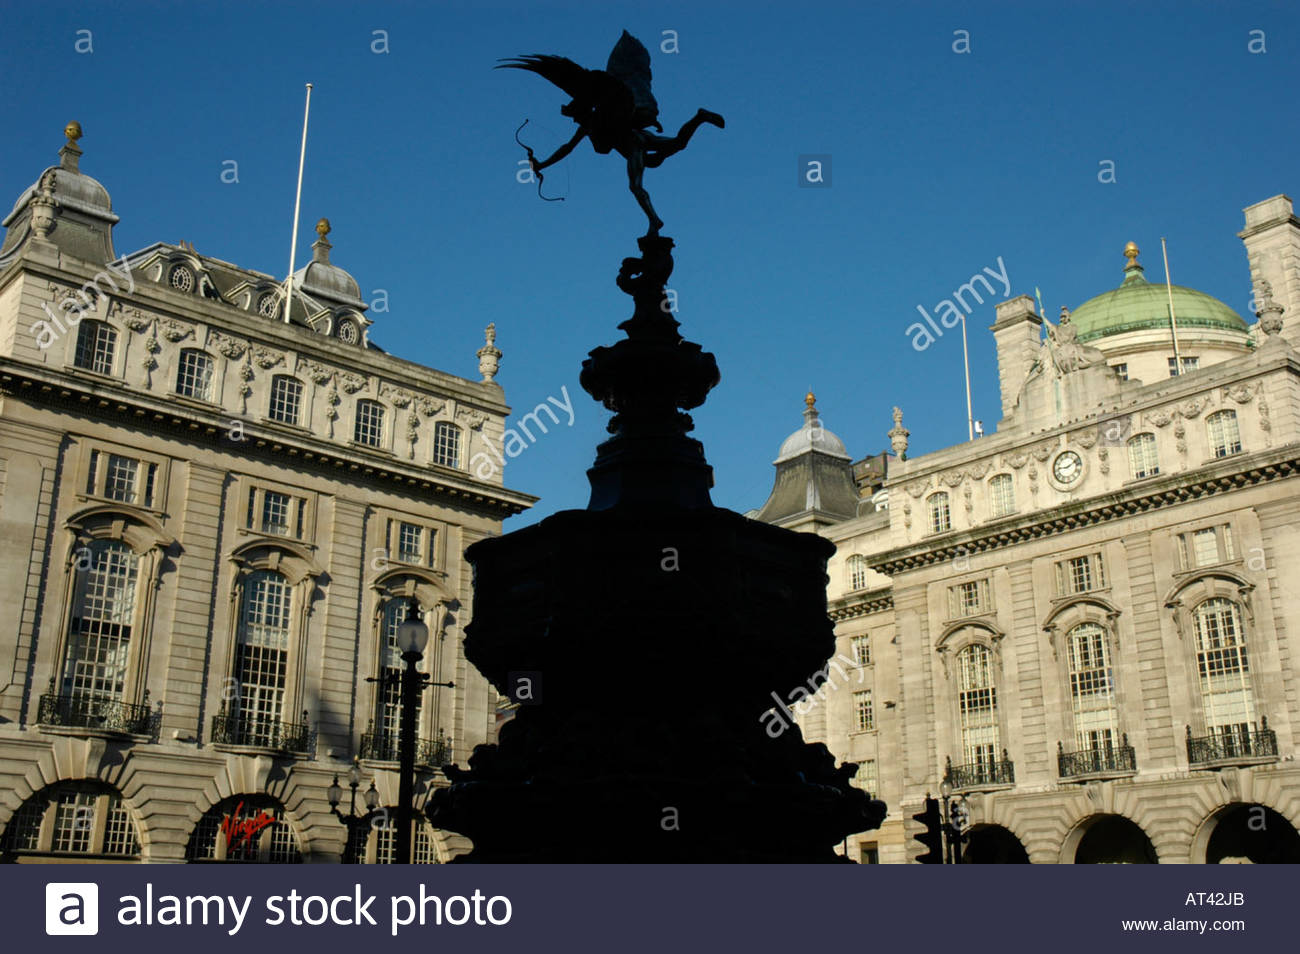 Silhouette Of Eros Statue With Victorian Buildings In The